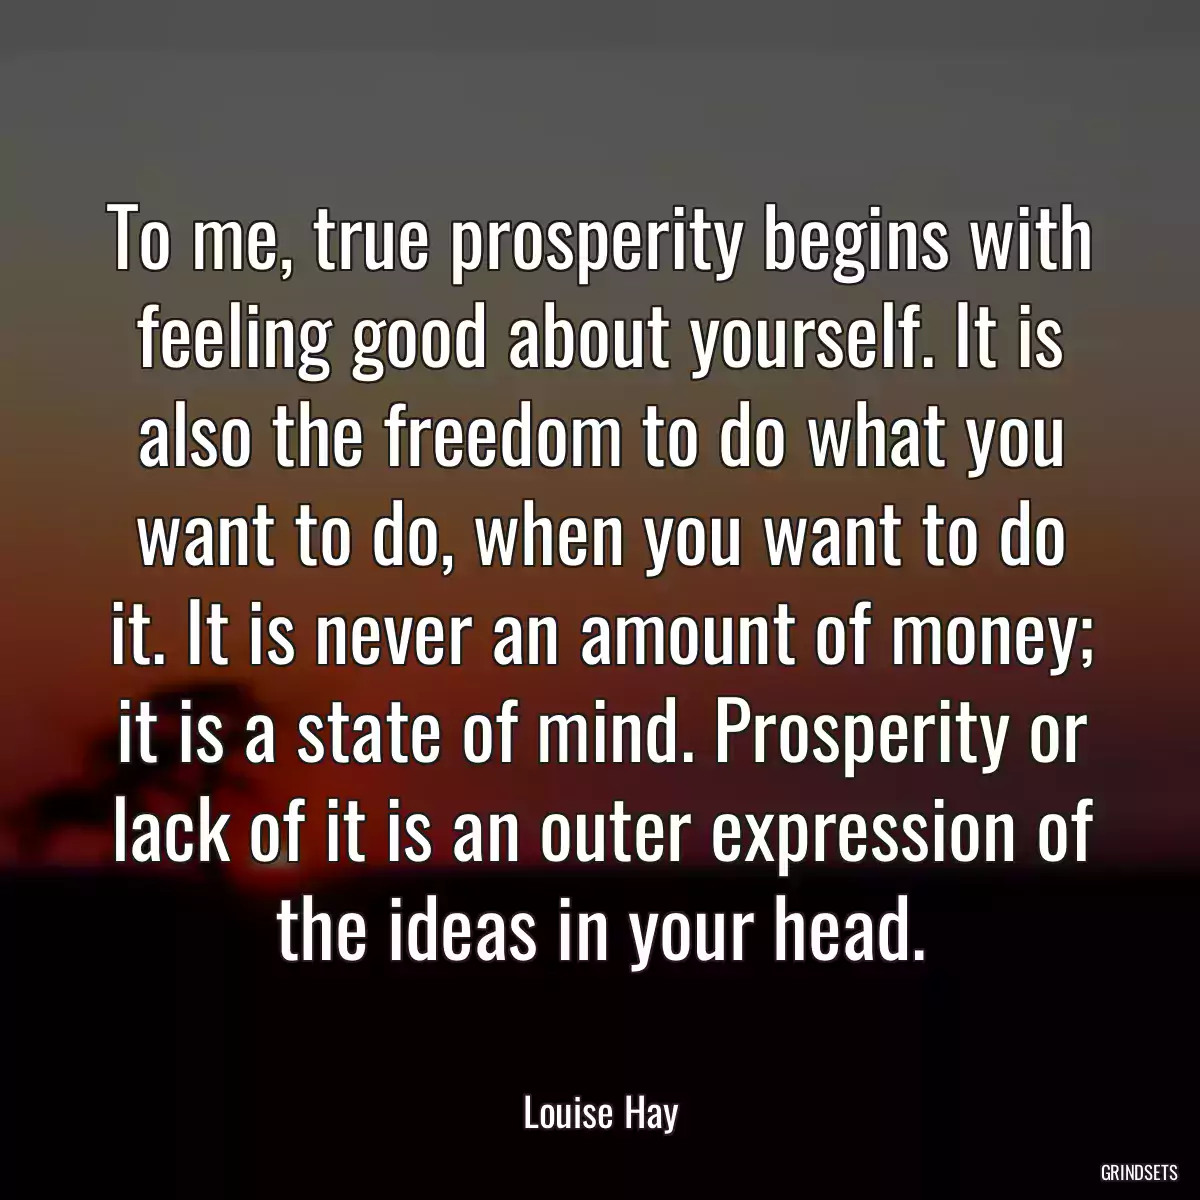 To me, true prosperity begins with feeling good about yourself. It is also the freedom to do what you want to do, when you want to do it. It is never an amount of money; it is a state of mind. Prosperity or lack of it is an outer expression of the ideas in your head.